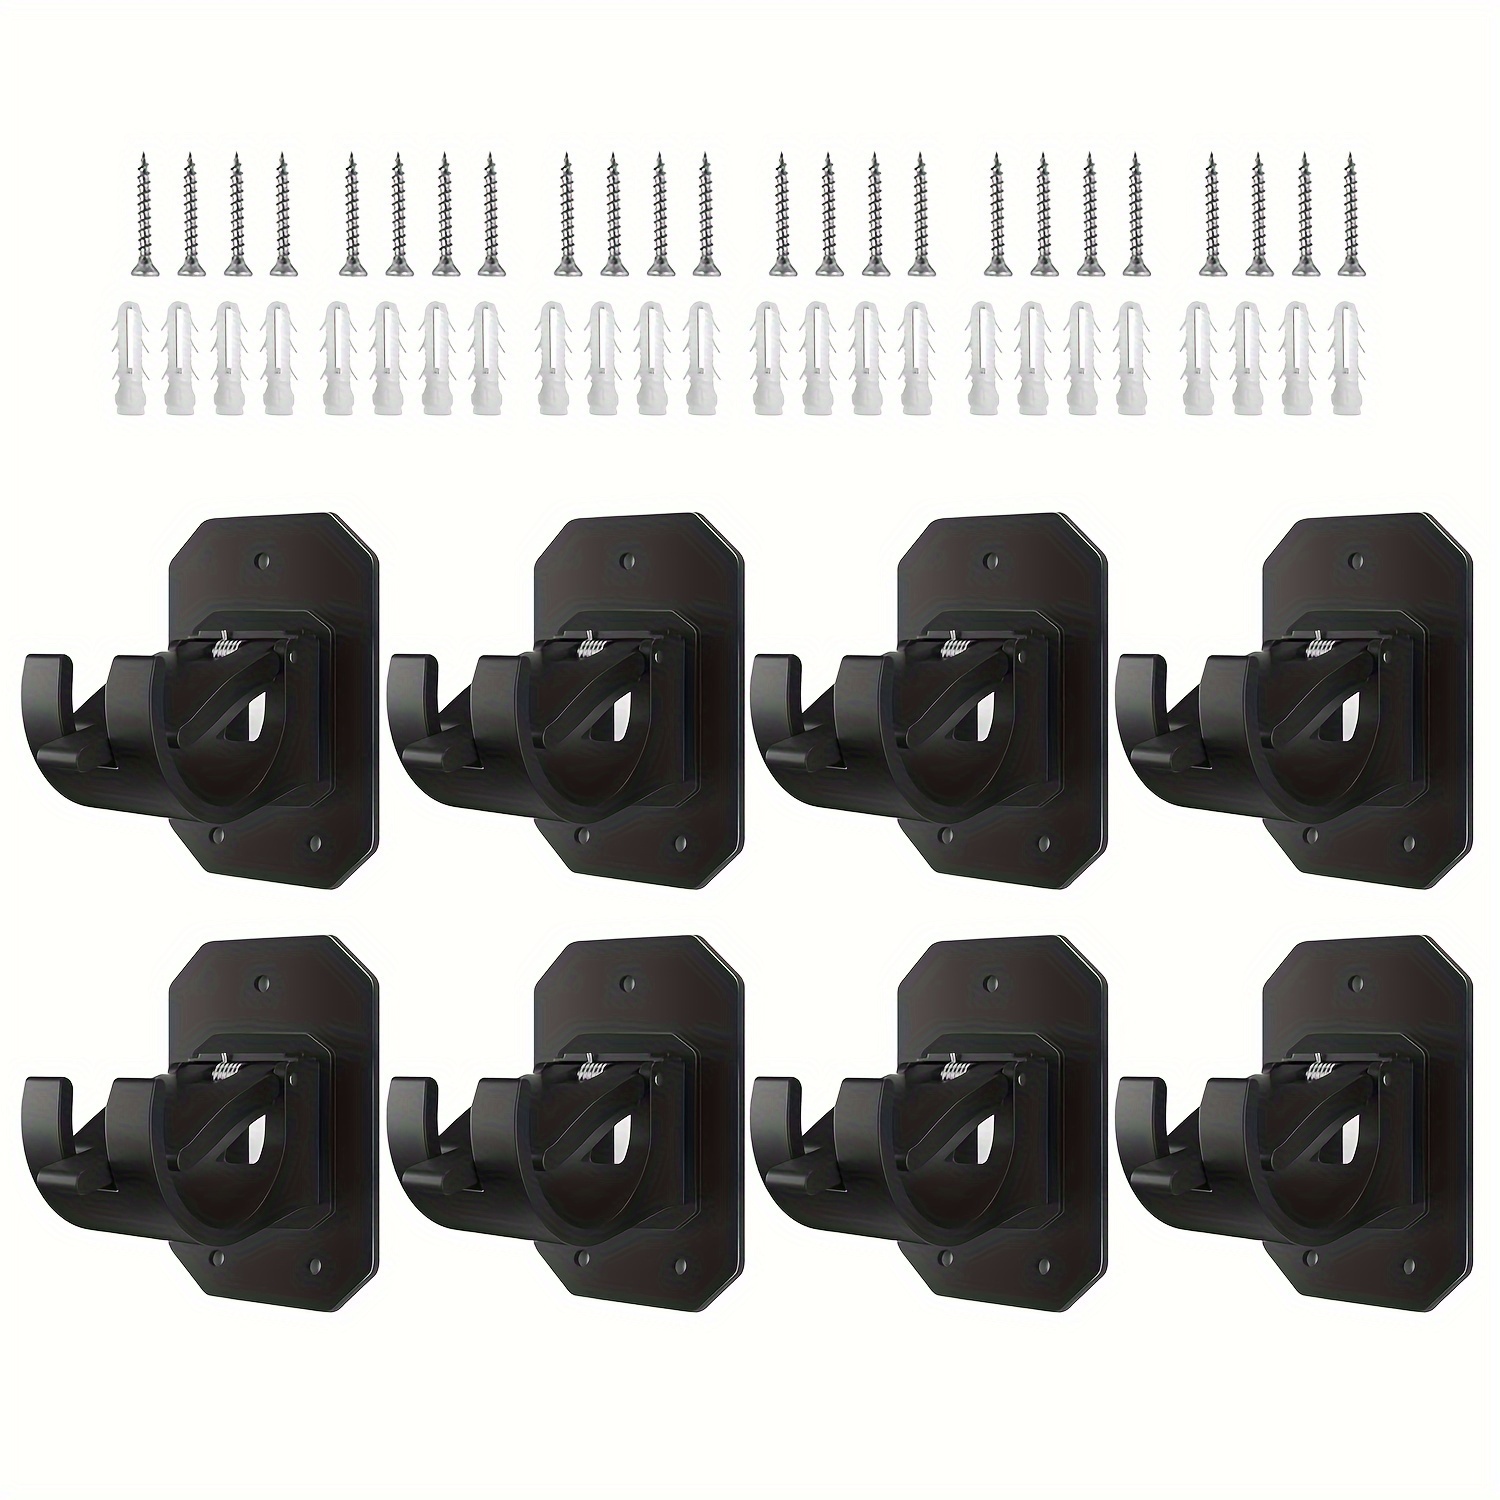 

8pcs Self Adhesive Curtain Rod Holders No Drill Curtain Rods Brackets No Drilling Nail Free Adjustable Curtain Rod Hooks Curtain Hangers For Bathroom Kitchen Home Bathroom Hotel (black)